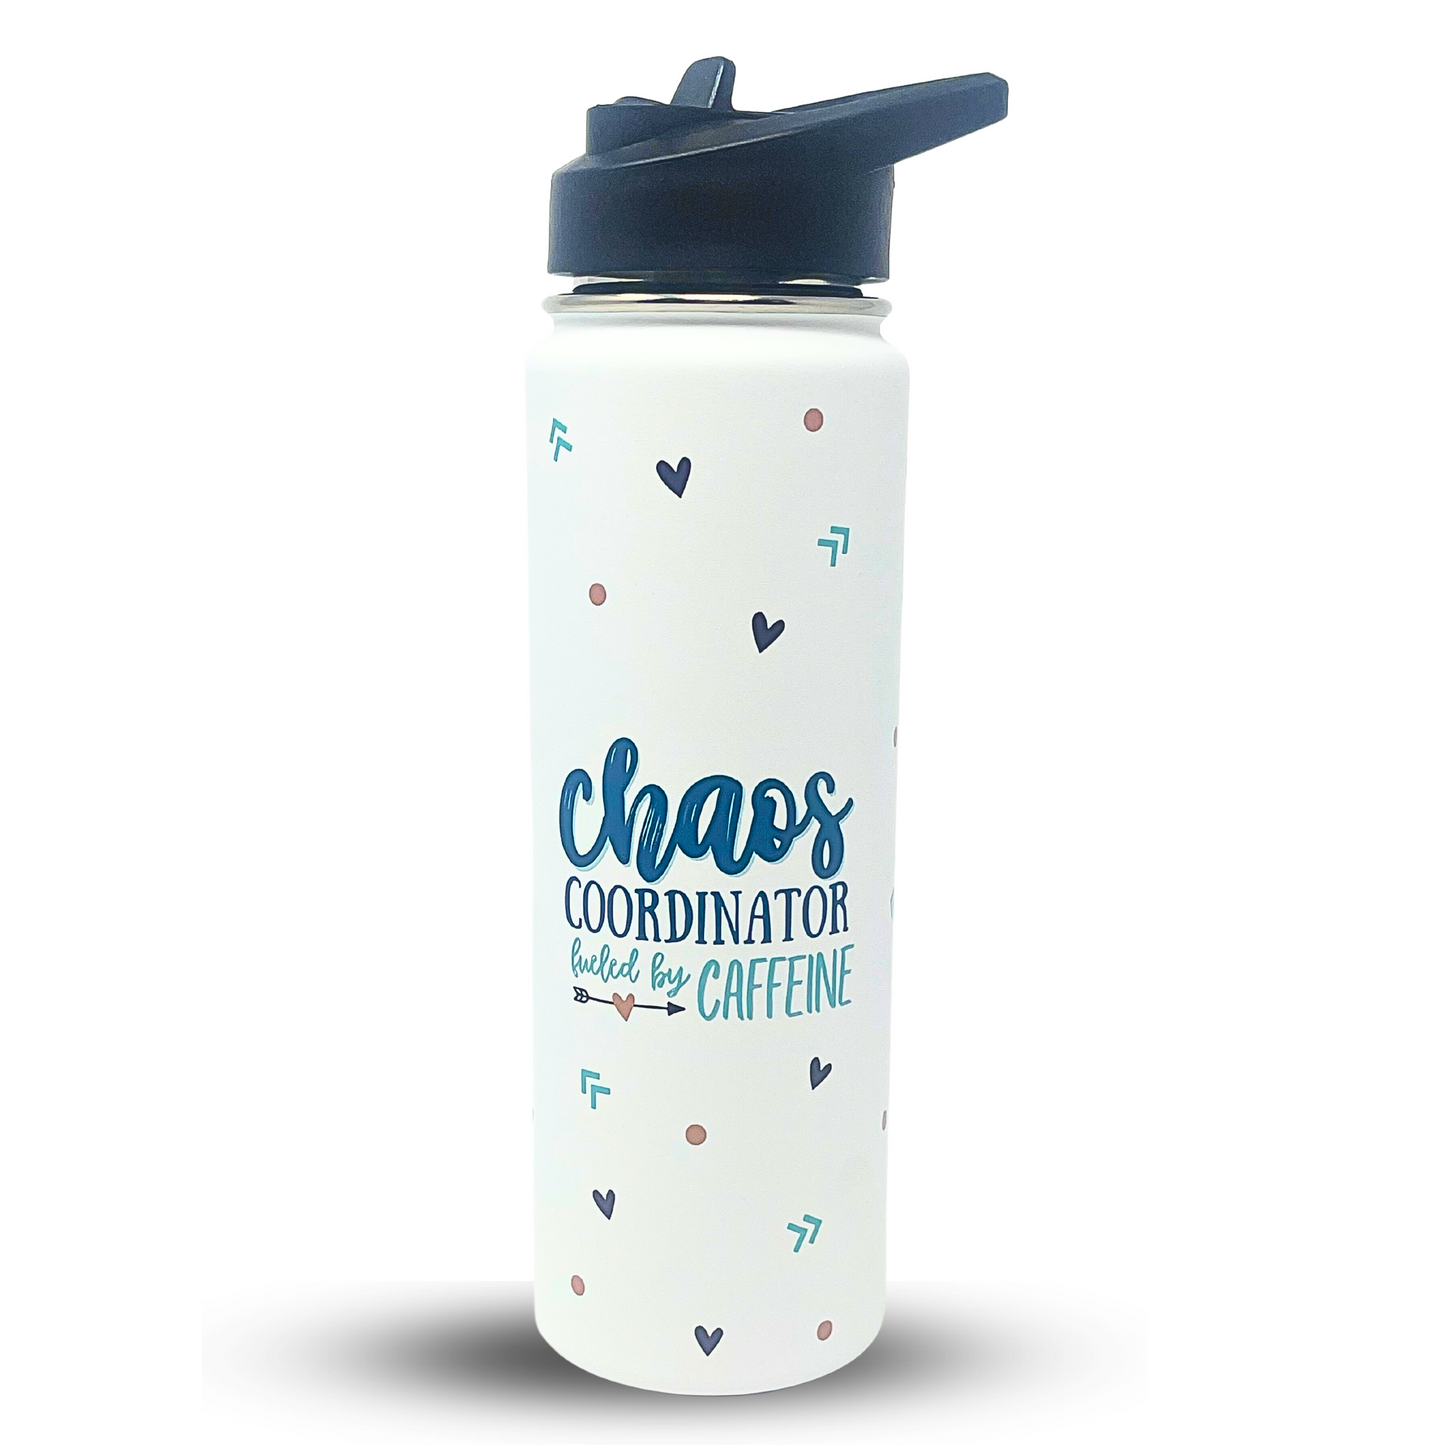 Boss Lady Tumbler - Best Boss Gifts for Women - Great Travel Water Bottle Gifts for Bosses, Coworkers, Mom, Christmas, Birthday